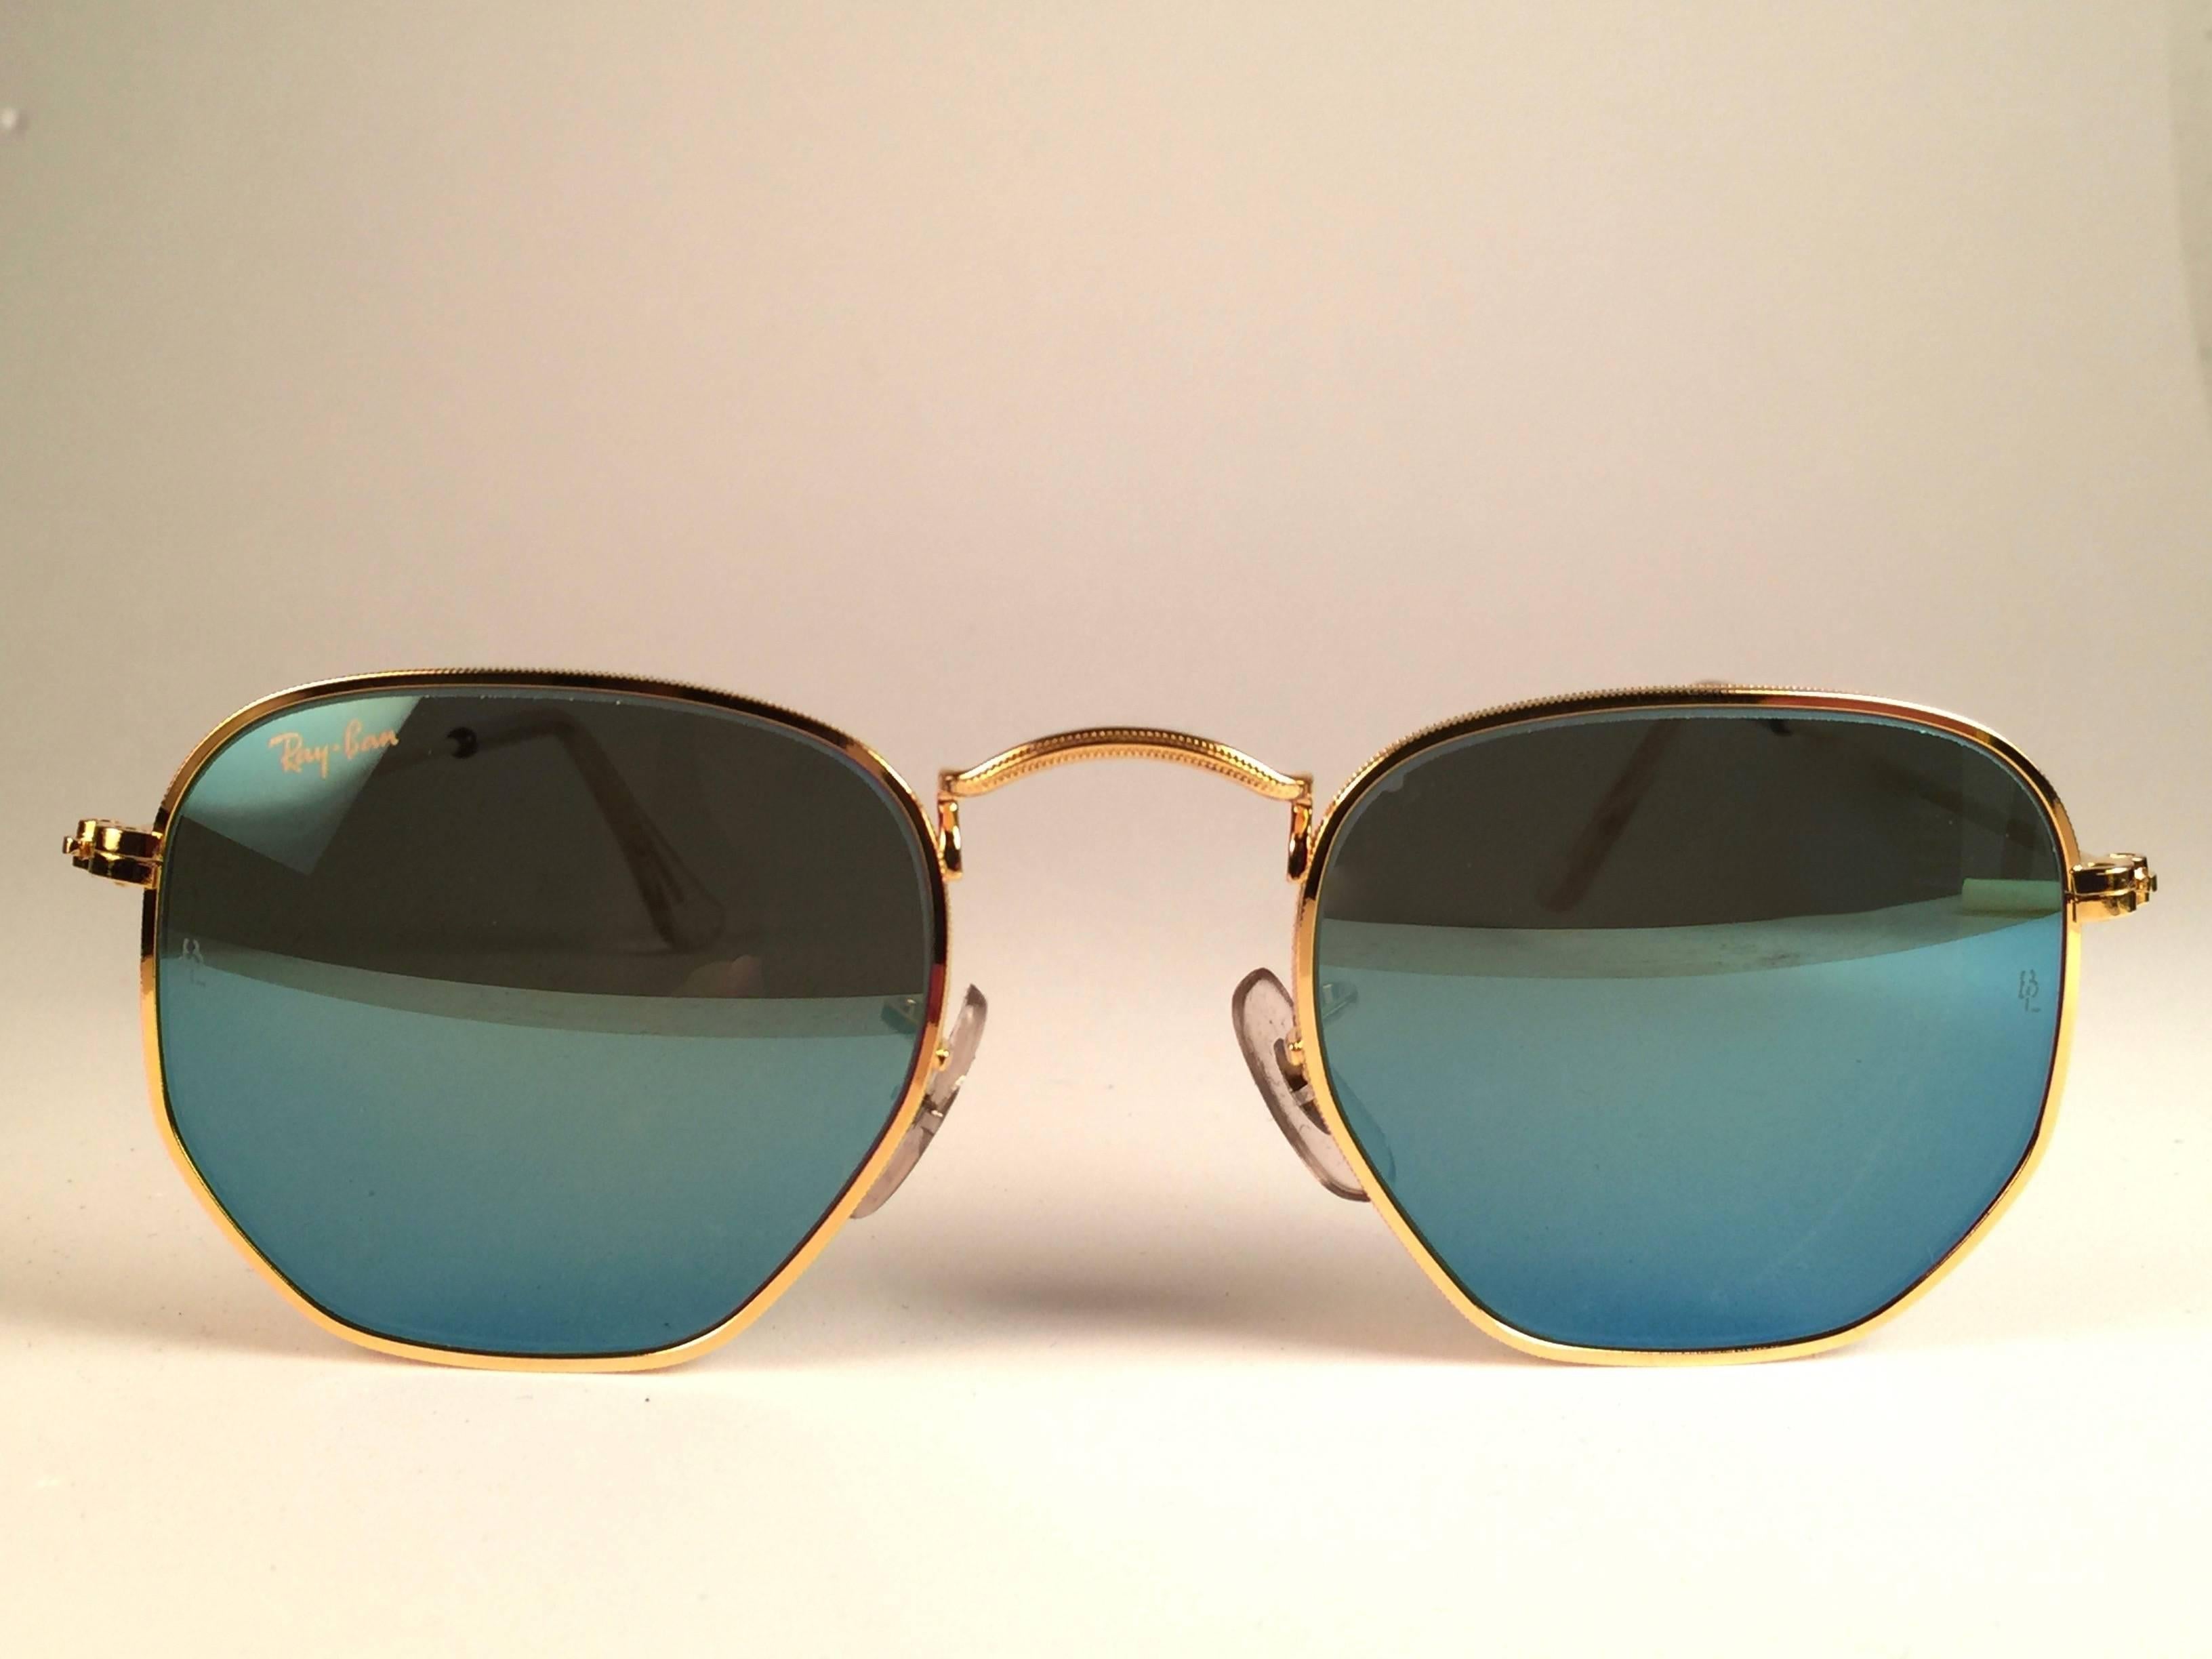 New Vintage Ray Ban Style 3 in Gold. Lenses are Blue mirror, B&L etched in the lenses.  Comes with its original Ray Ban B&L case. 
This piece may show minor sign of wear due to storage. 
A seldom piece in new, never worn or displayed condition.